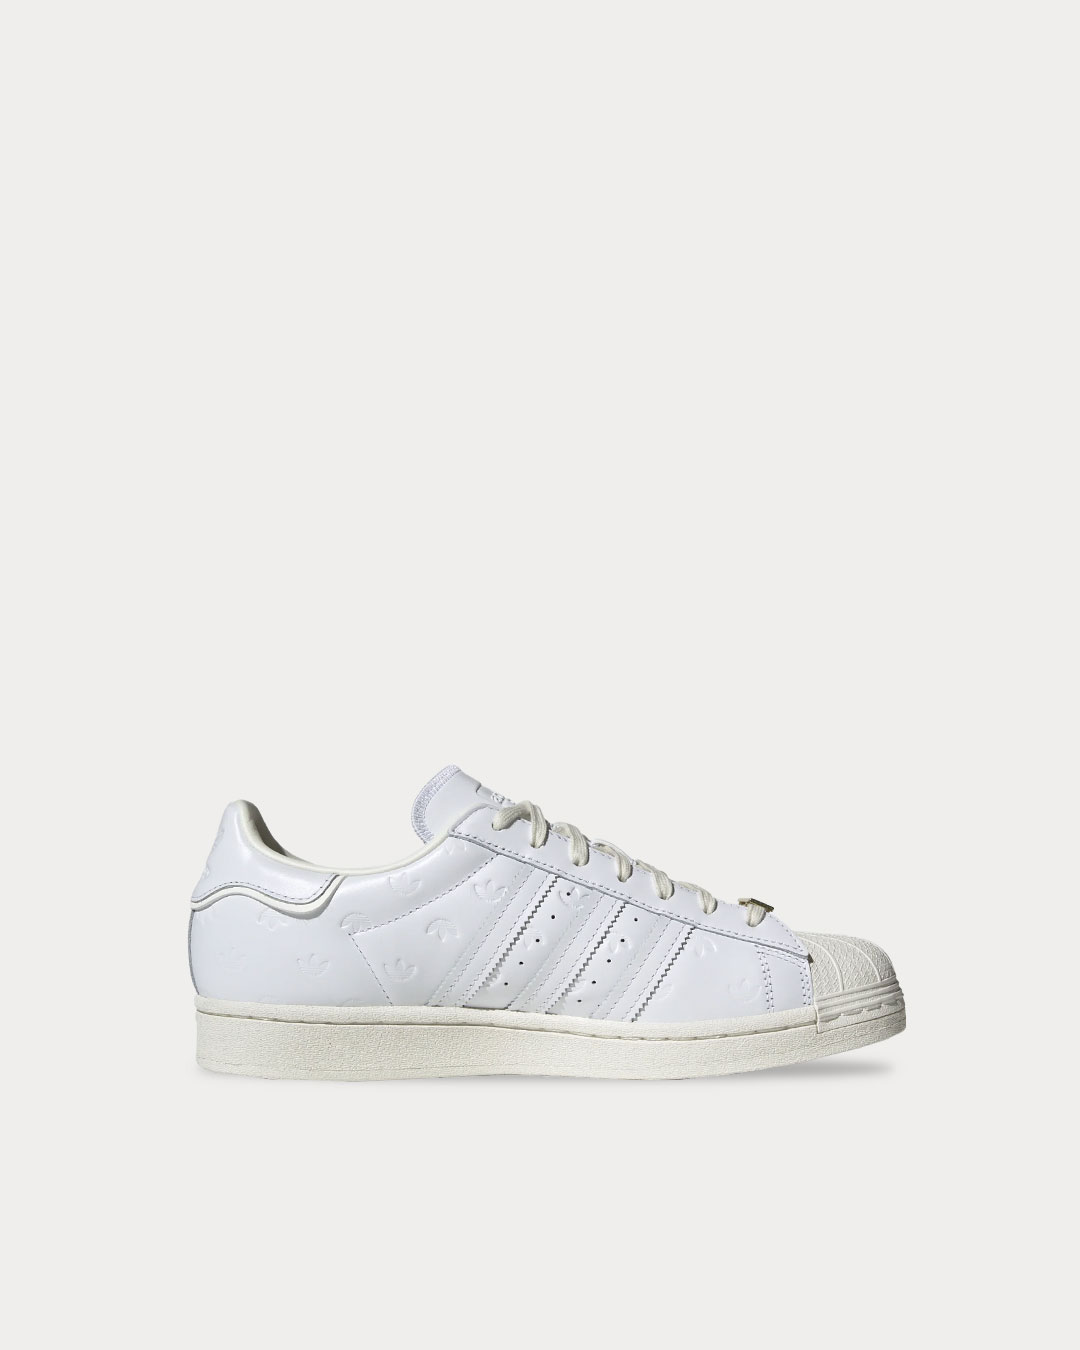 ADIDAS SUPERSTAR SHOES – The Foot Action-cheohanoi.vn